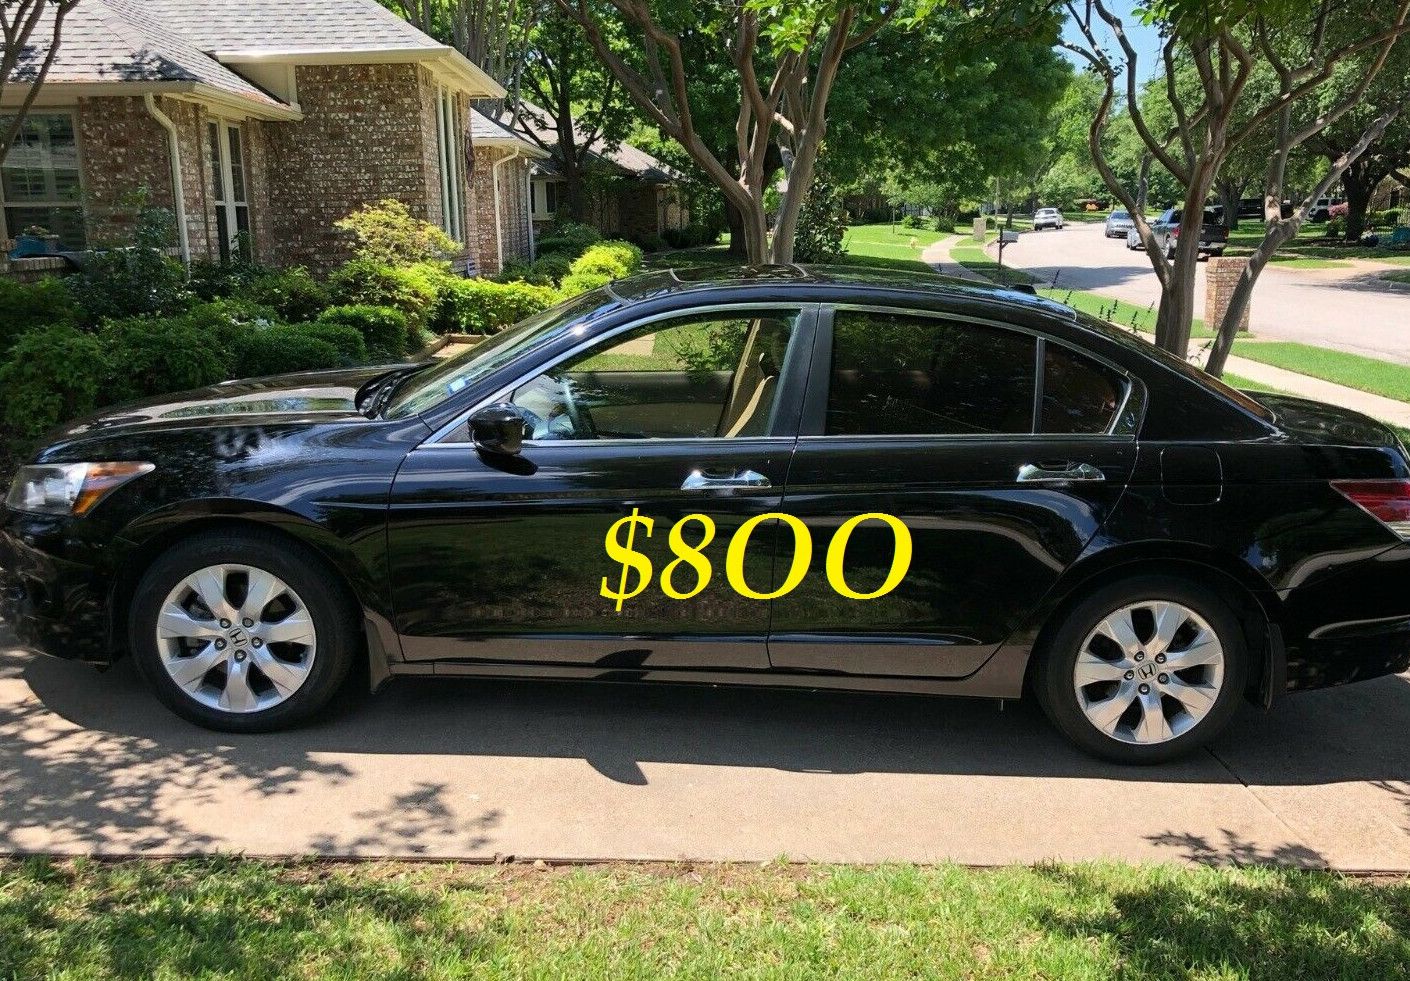 🔥🔥$8OO I'm seling URGENTLY my family car 2OO9 Honda Accord Sedan Super cute and clean in and out.🍂🍂